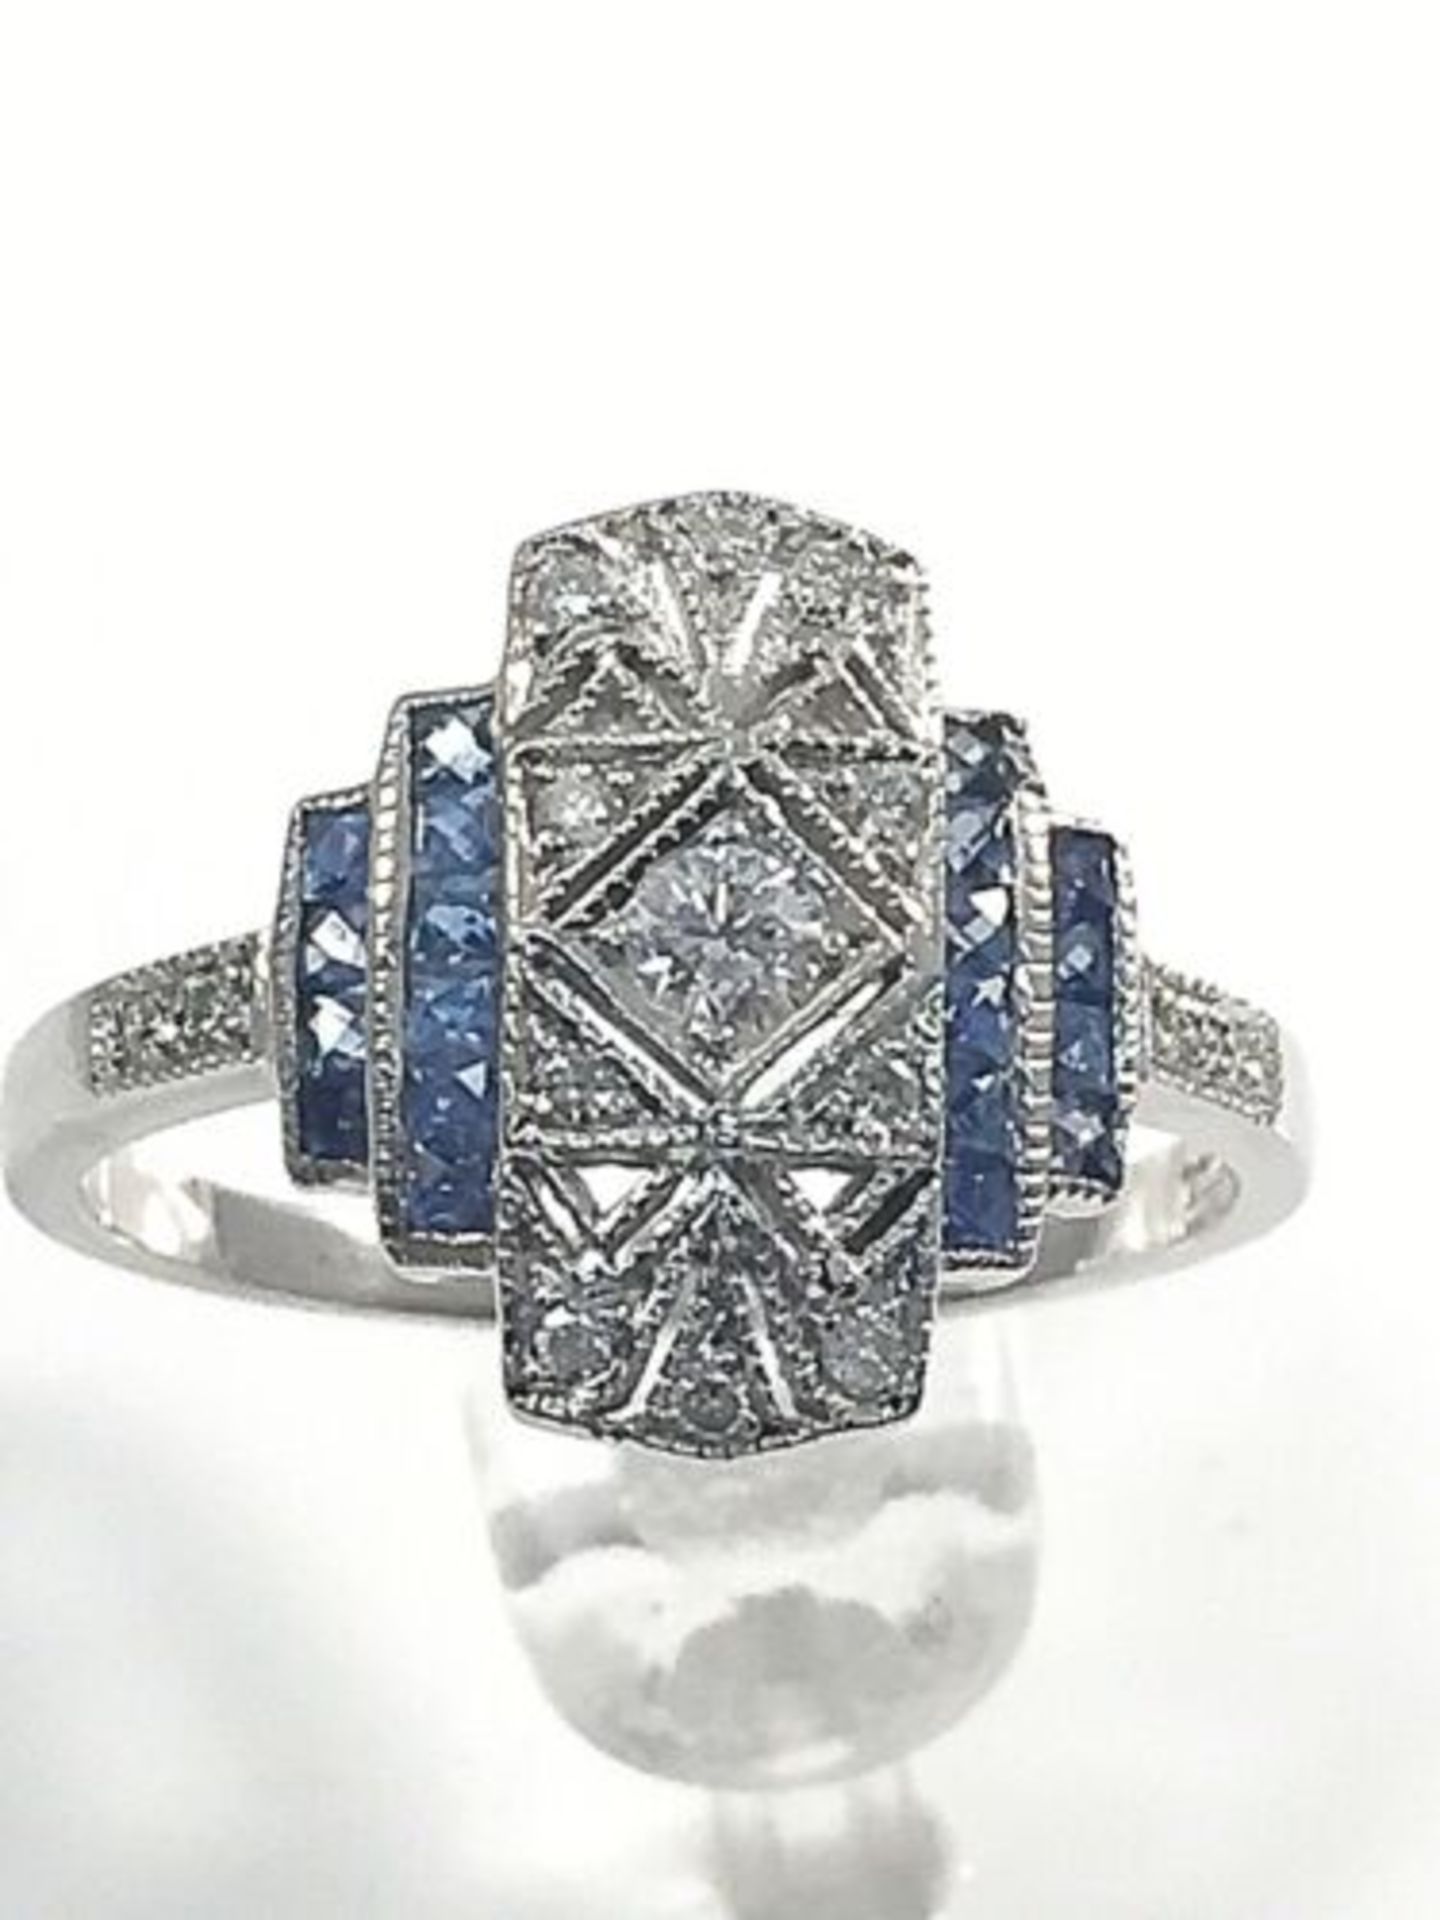 DIAMOND AND SAPPHIRE ART NOUVEAU STYLE DRESS RING IN WHITE GOLD - Image 2 of 6